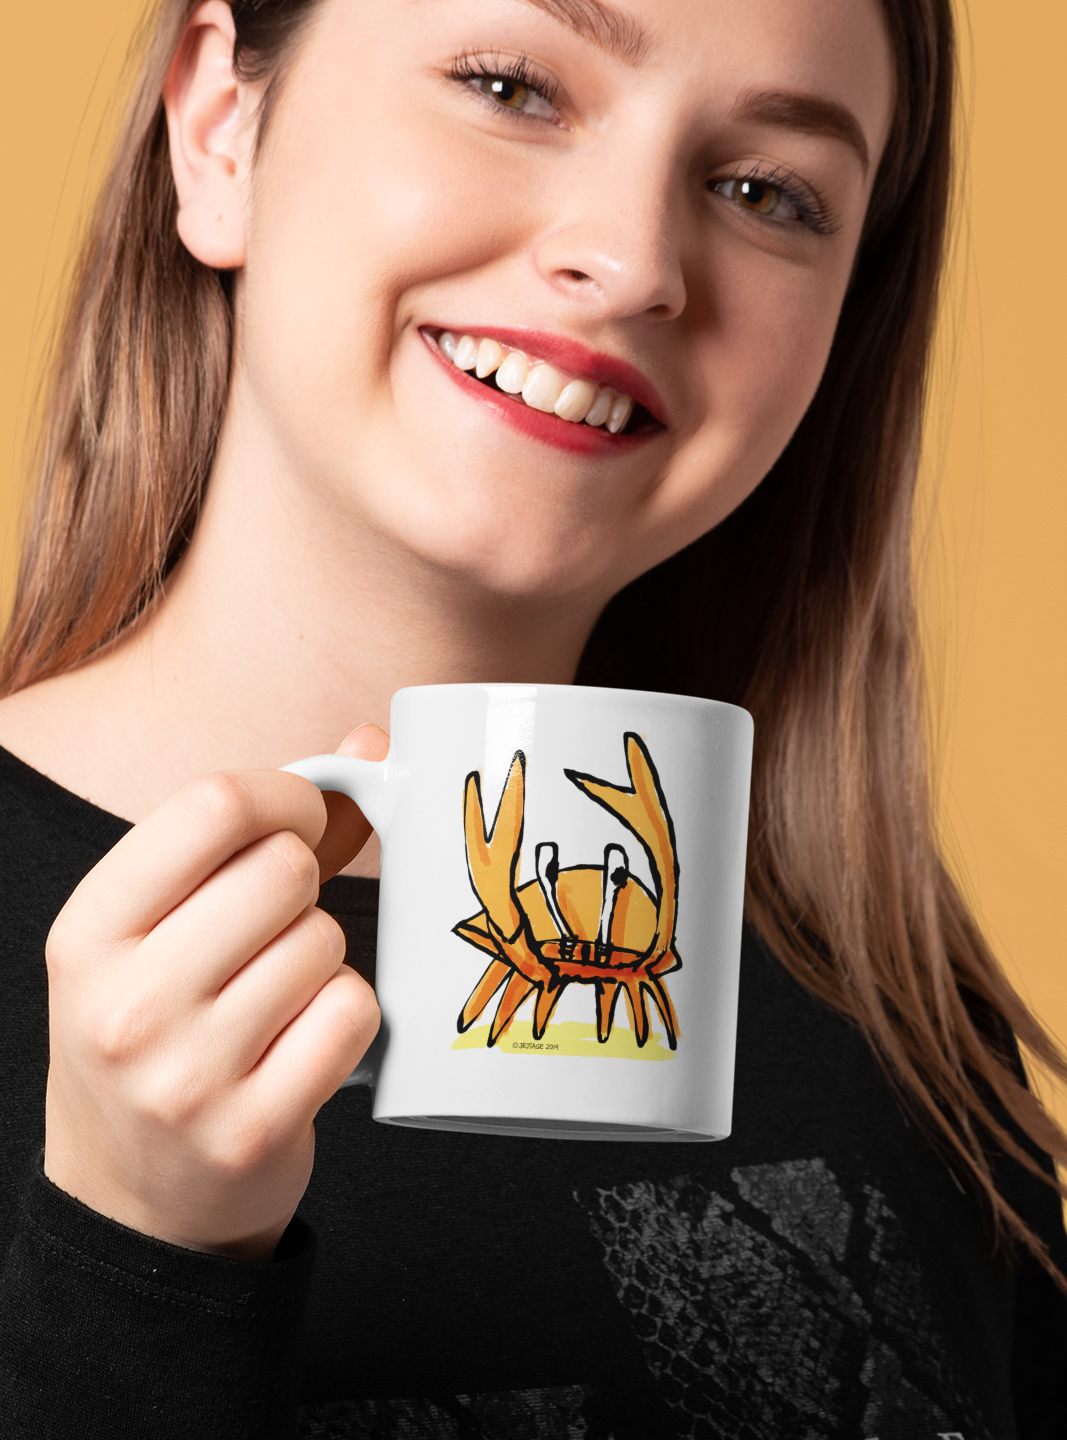 A young woman holding a White Ceramic Hector and Bone Mug with an illustration of a cute Angry Crab